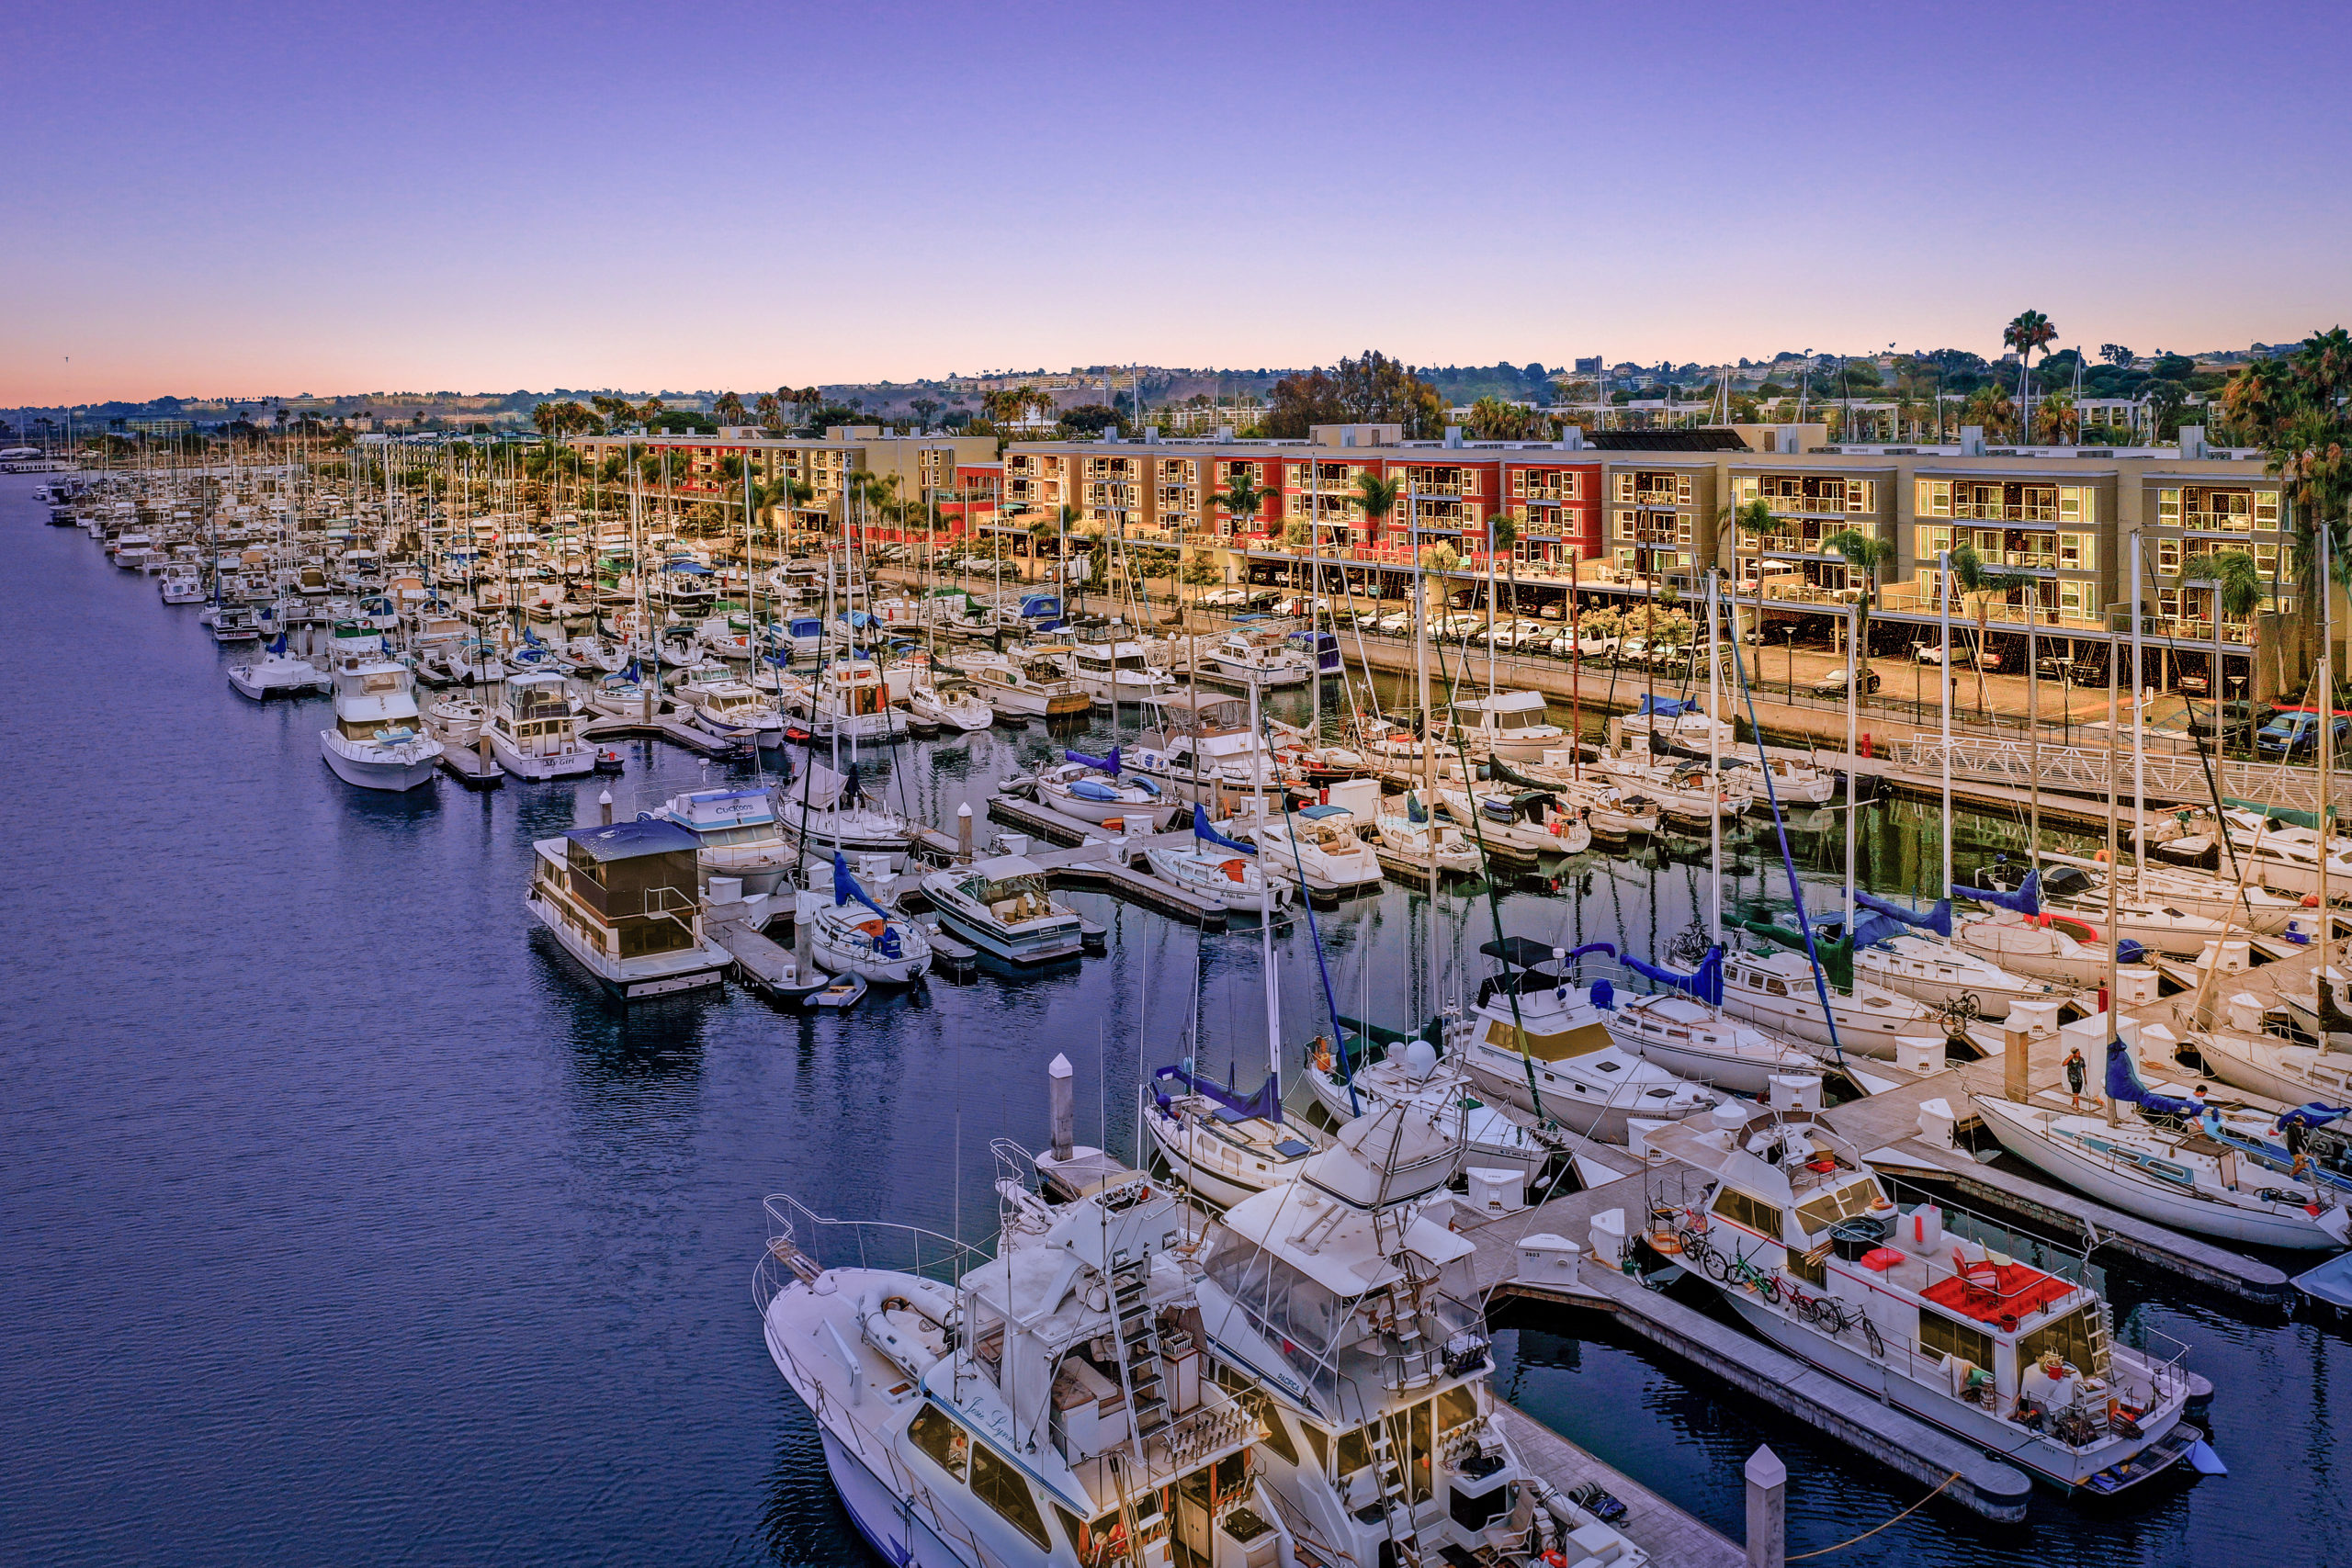 View of the marina from new hotels Courtyard by Marriott and Residence Inn by Marriott in Marina del Rey